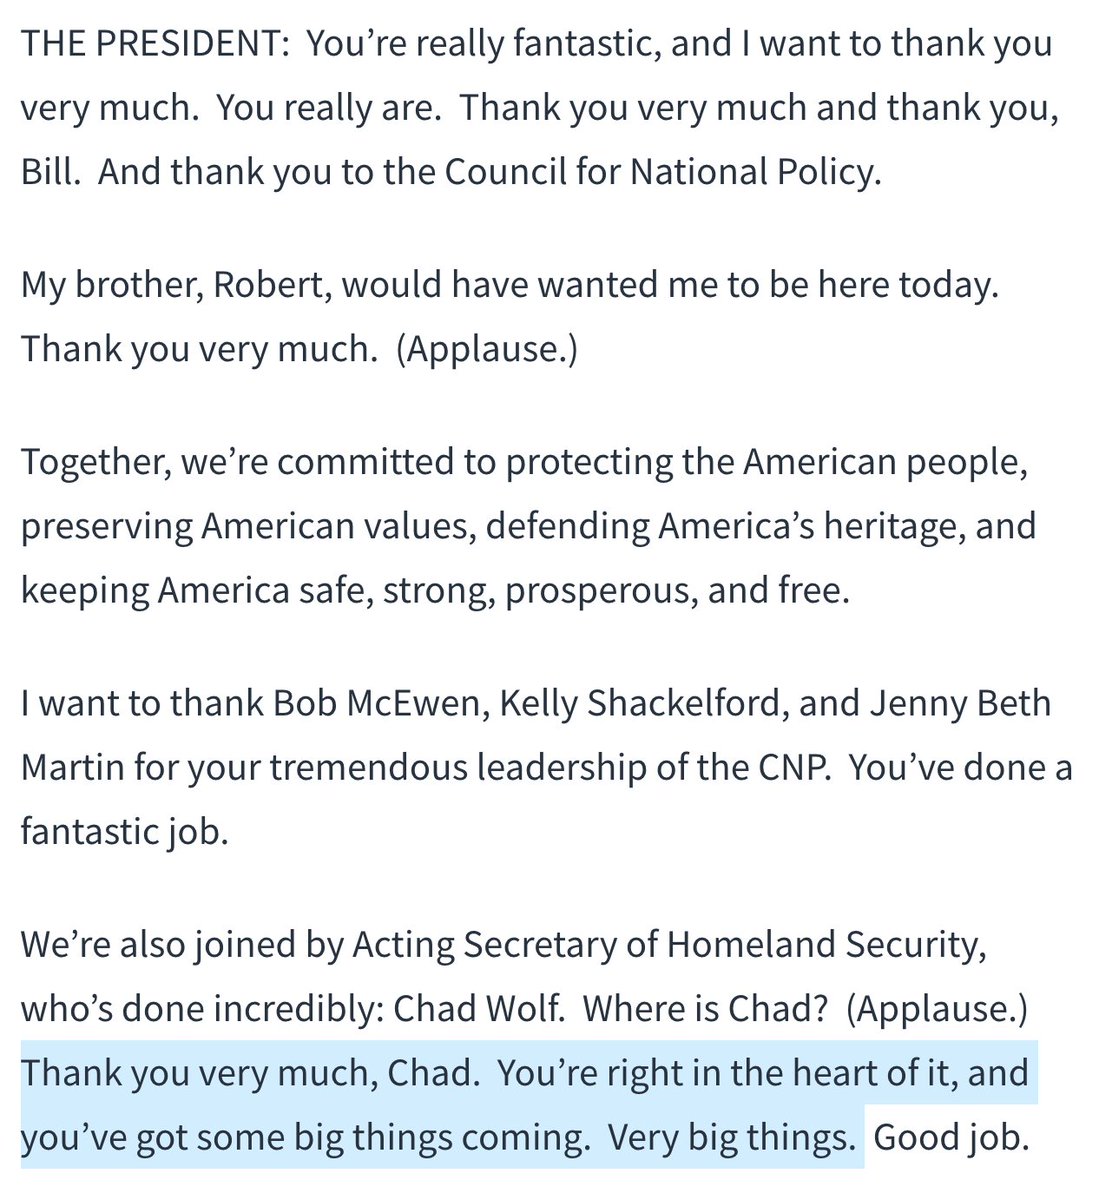 What Trump said to the same group was much less targeted to their interests, and focused mainly on himself.1. Chad Wolf, illegally appointed to run ICE, the man who deployed armed DHS agents and contractors to harm protestors in Oregon and elsewhere, is given a fawning mention.